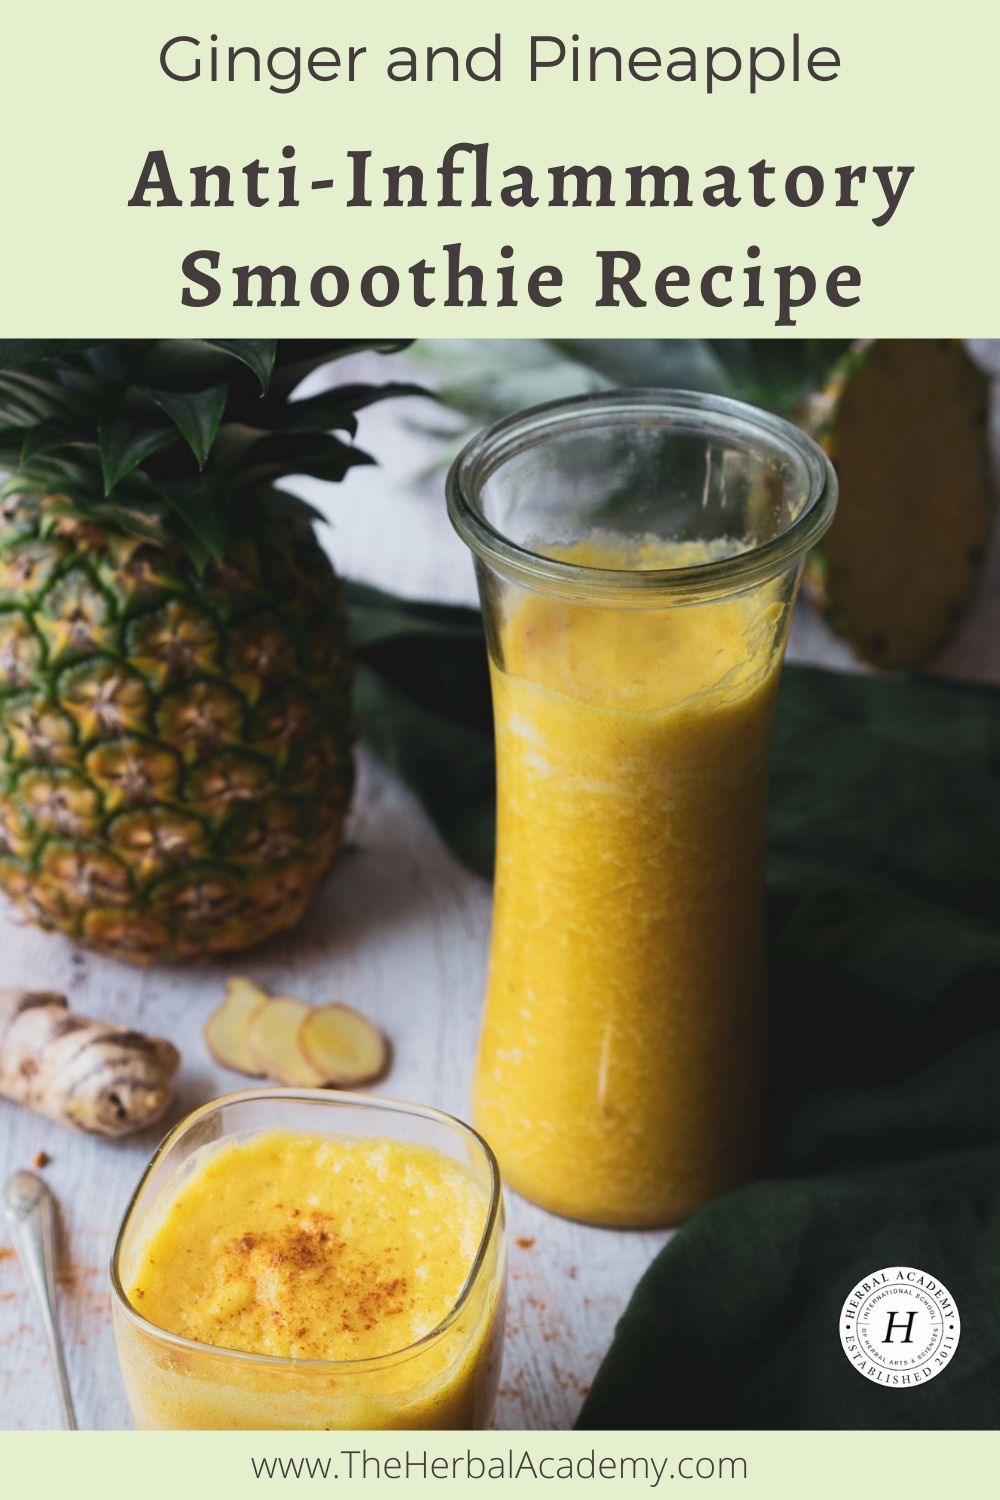 Ginger and Pineapple Anti-Inflammatory Smoothie  | Herbal Academy | This all-purpose, anti-inflammatory smoothie featuring pineapple, ginger, and turmeric is both tasty and beneficial.